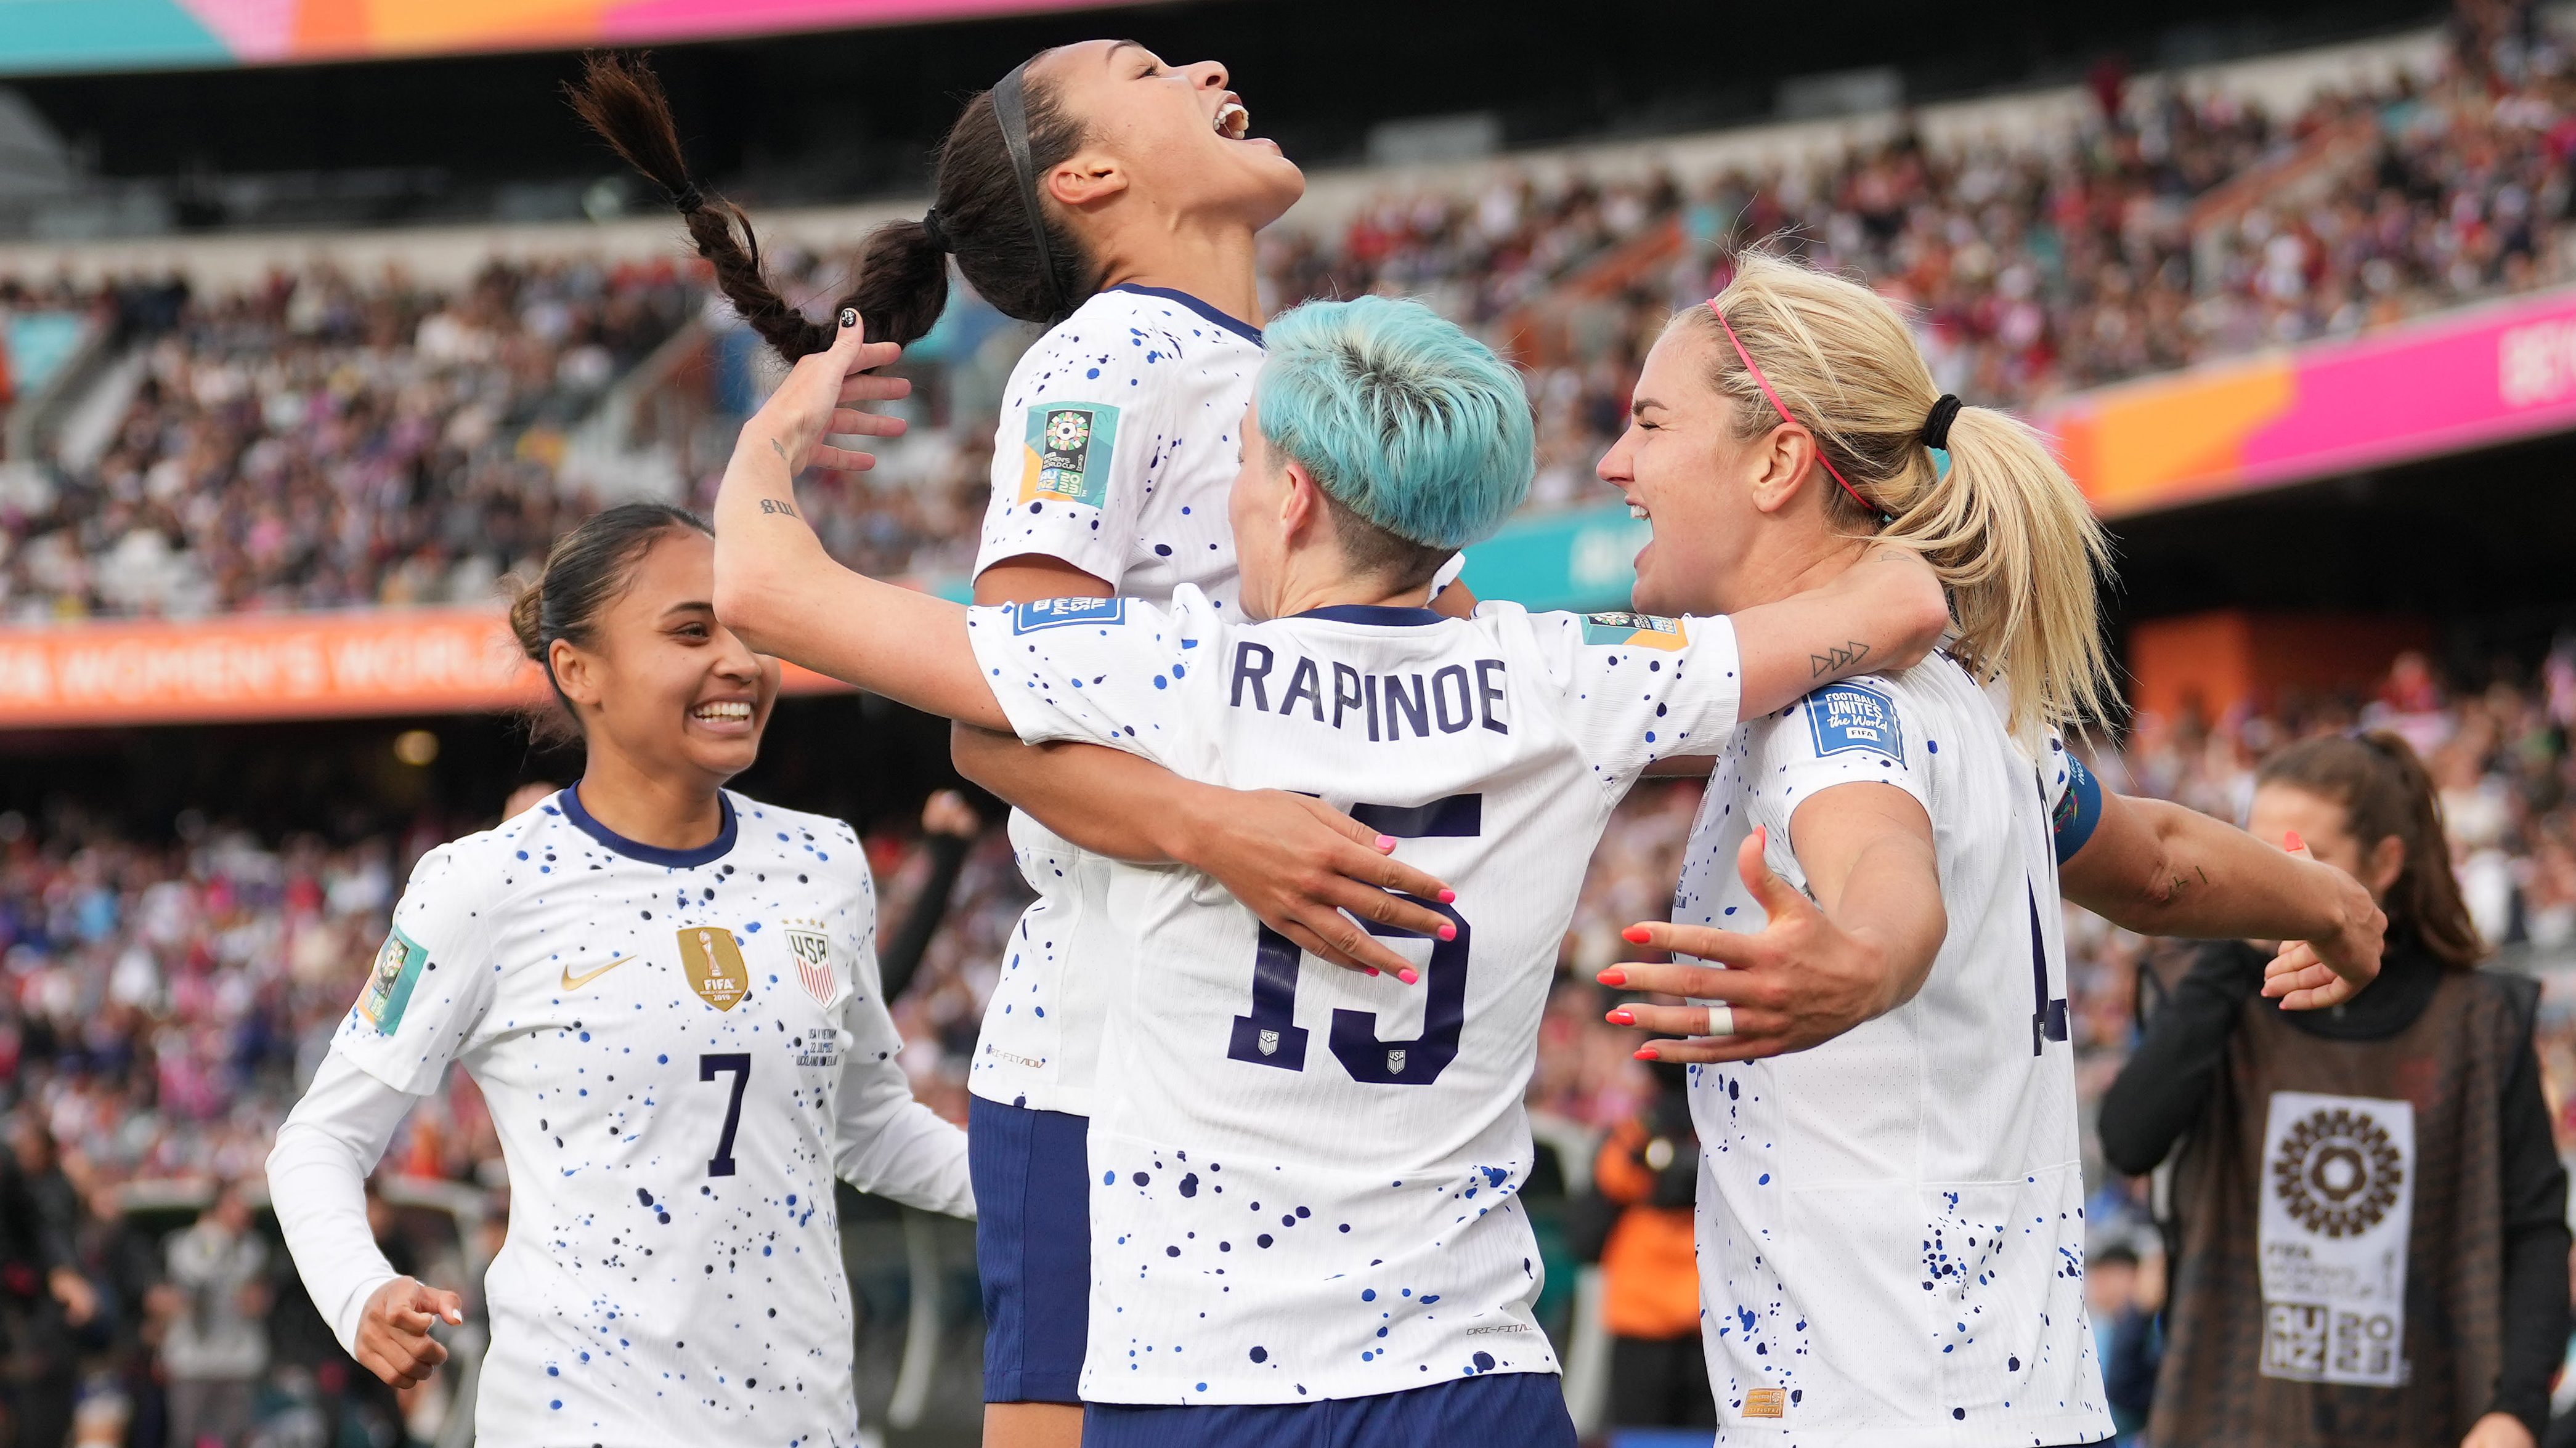 Women's World Cup 2019: What we learned from the historic tournament